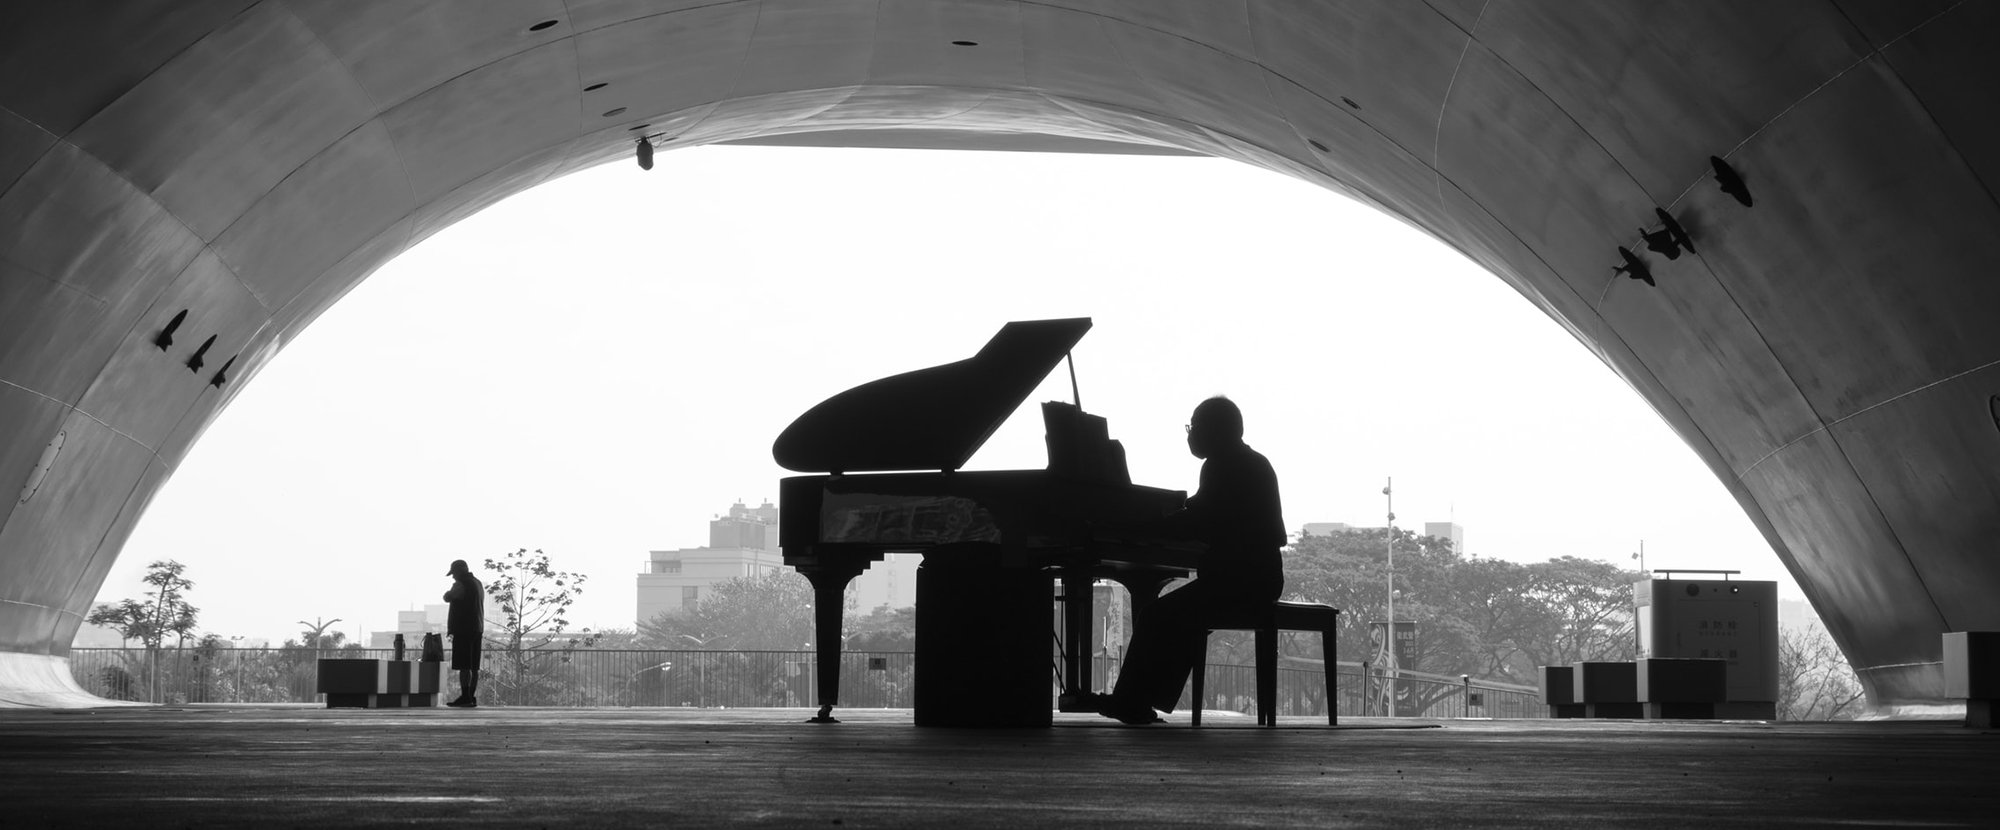 black and white photo of a man playing grand piano under an outdoor wide domed roof.